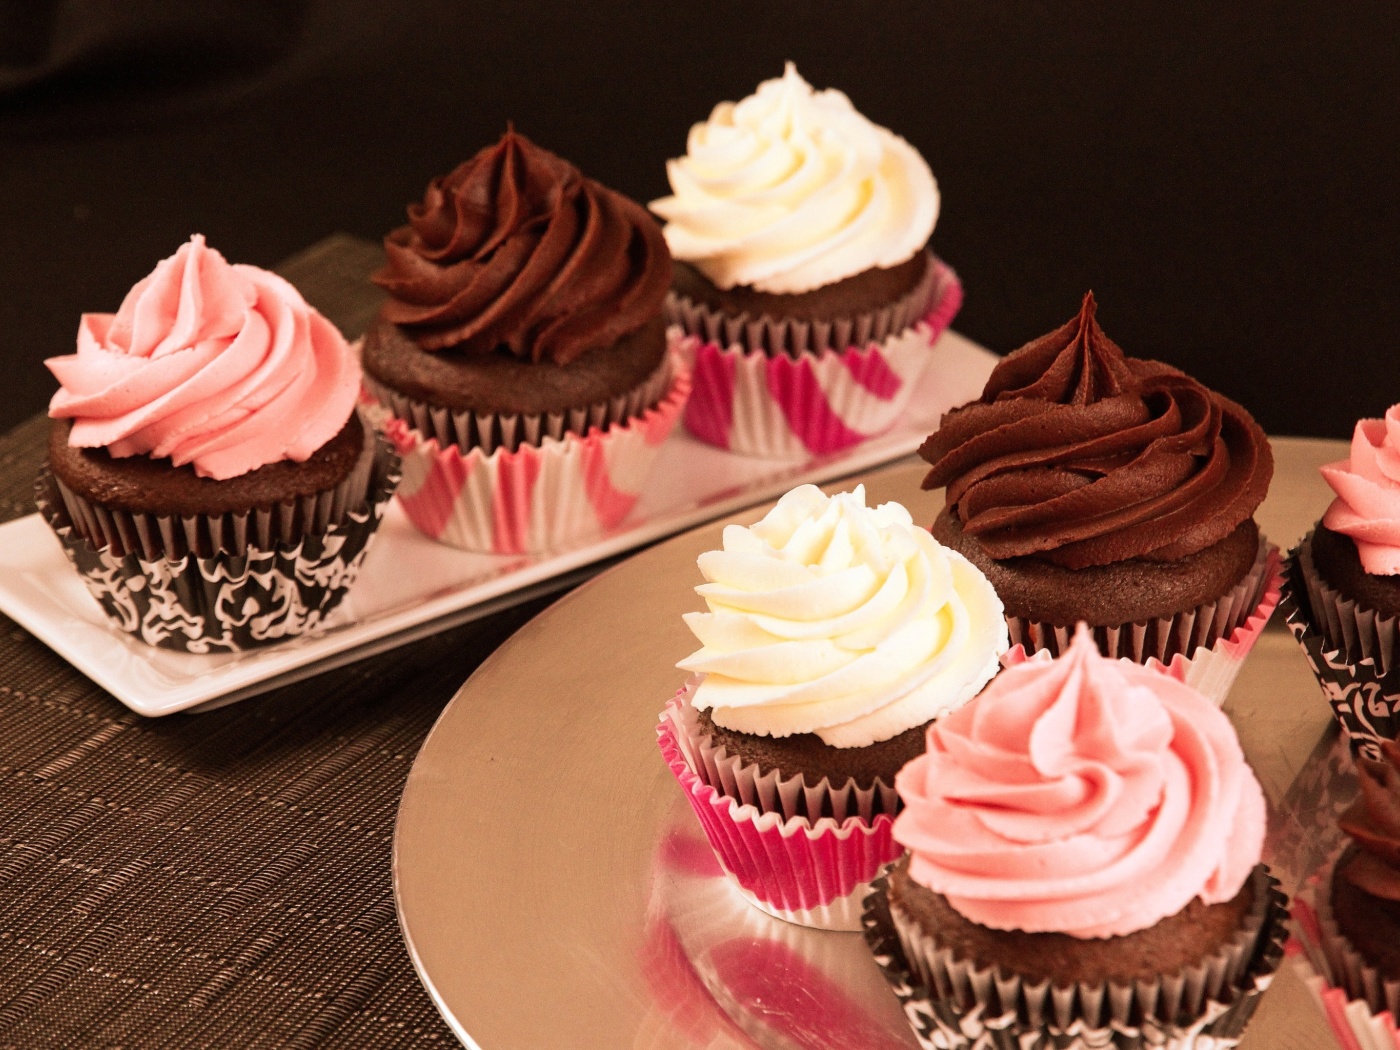 Cupcakes with Creme wallpaper 1400x1050